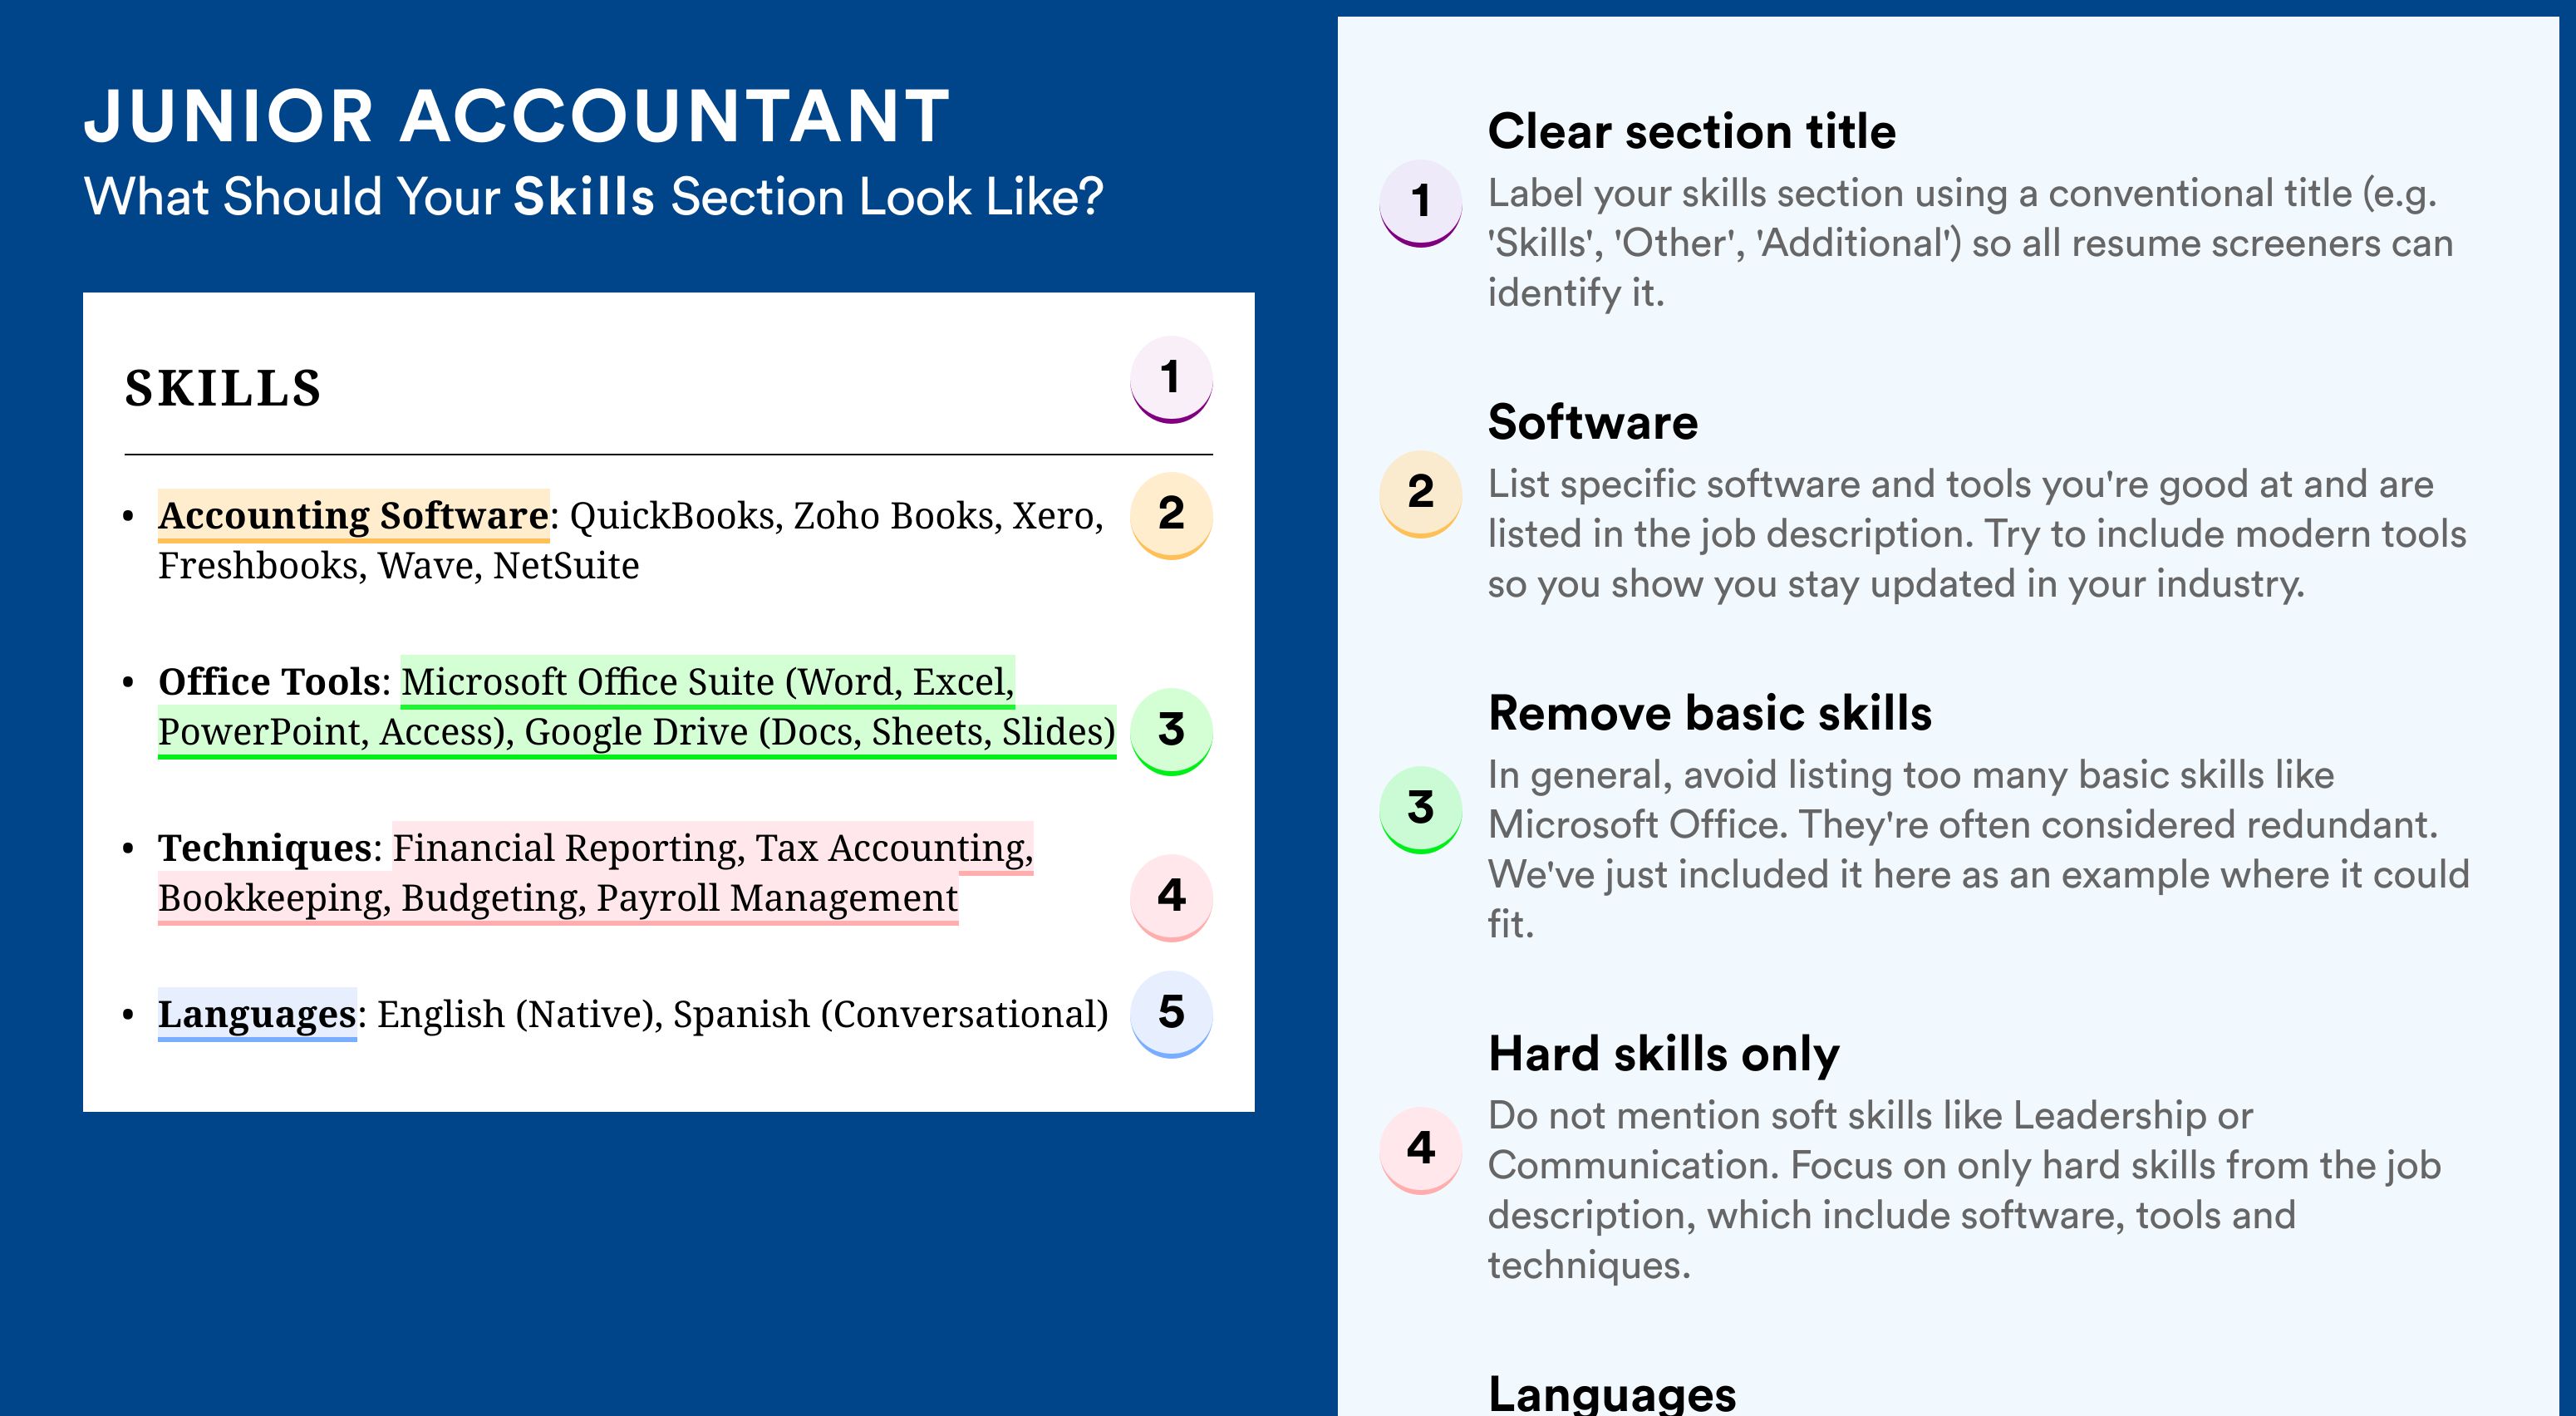 How To Write Your Skills Section - Junior Accountant Roles